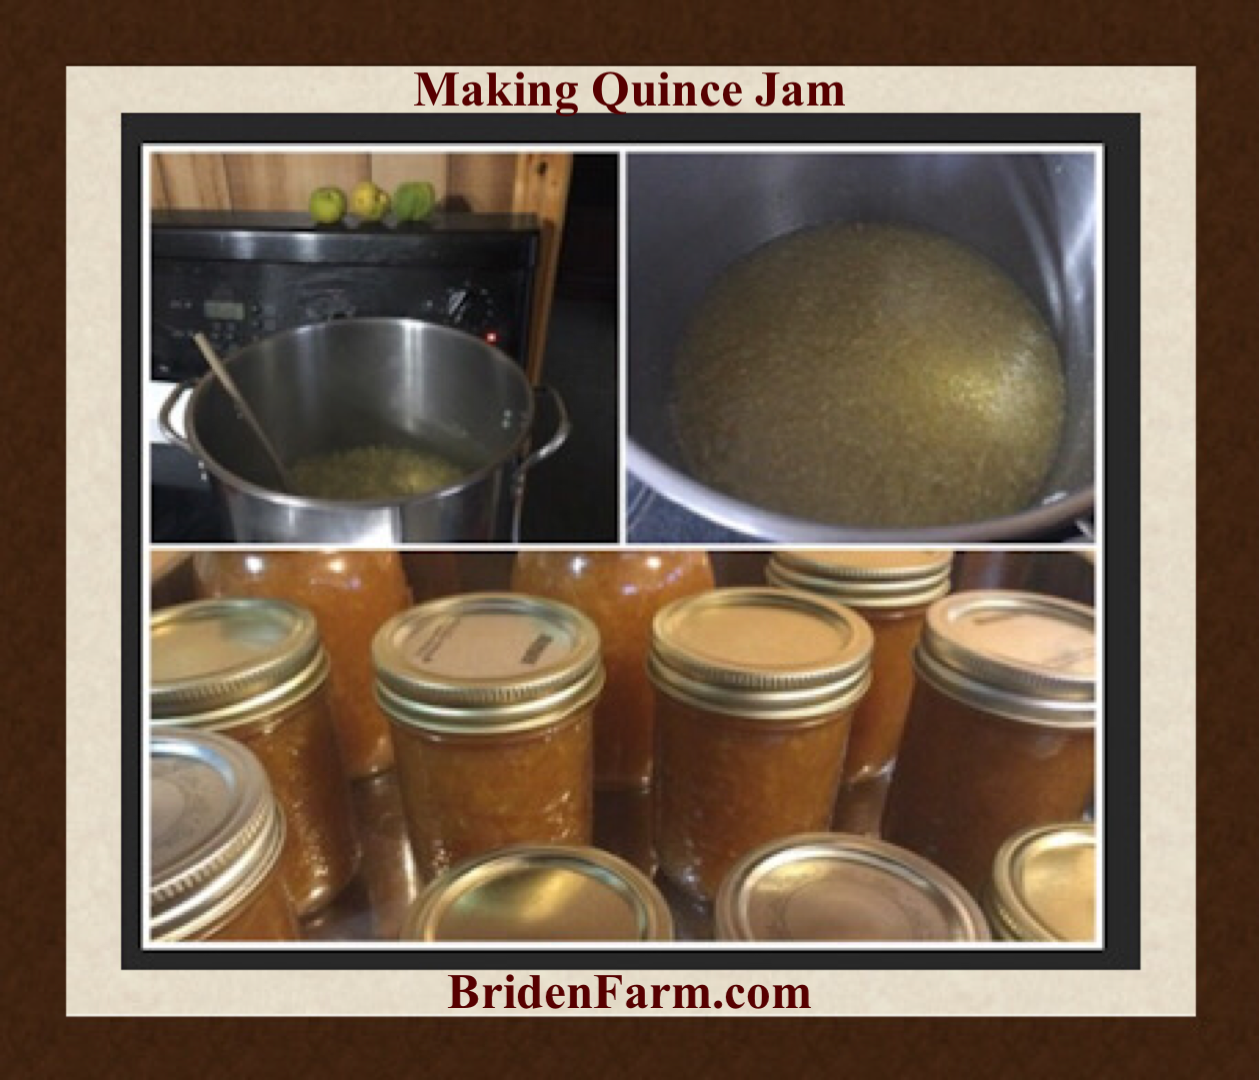 Making Quince Jam